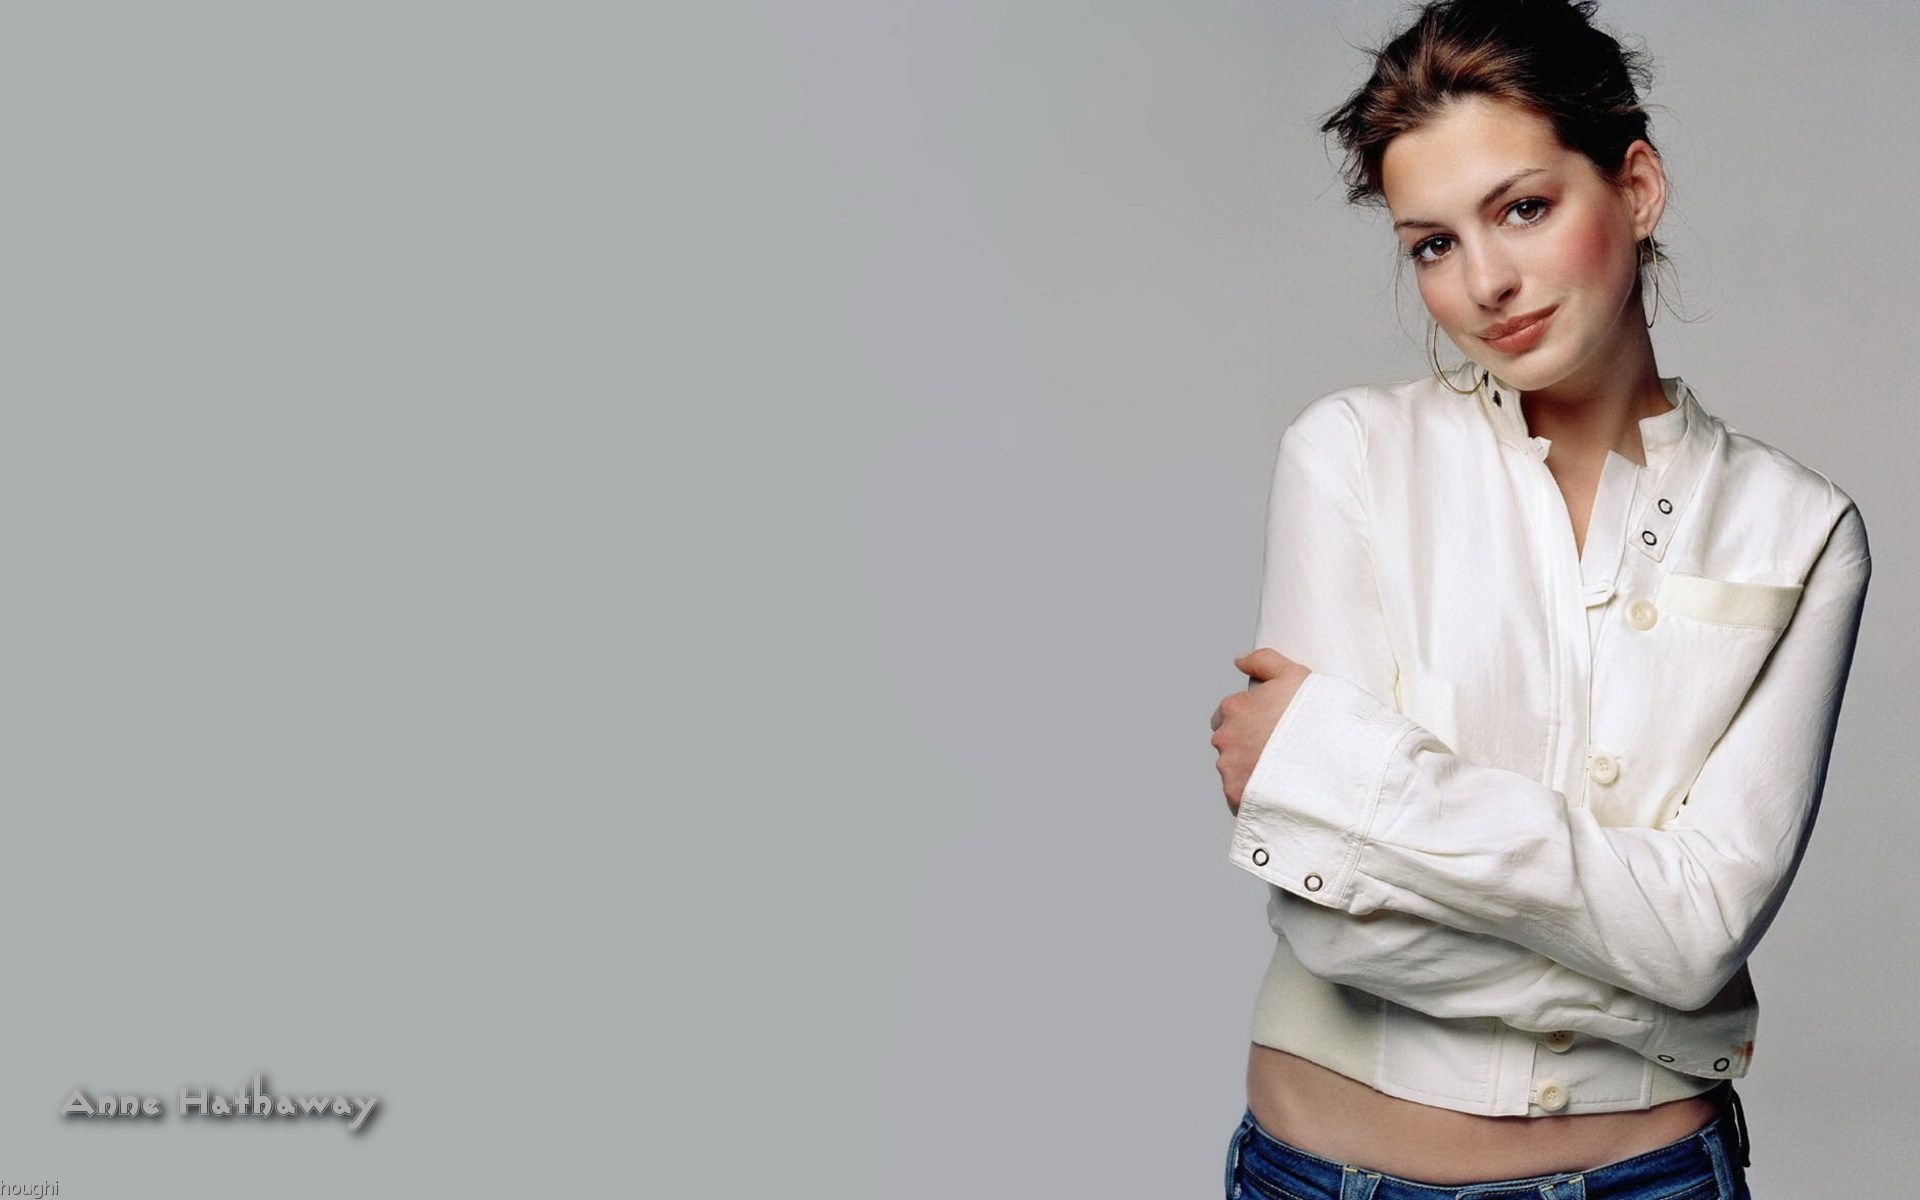 Anne Hathaway #044 - 1920x1200 Wallpapers Pictures Photos Images